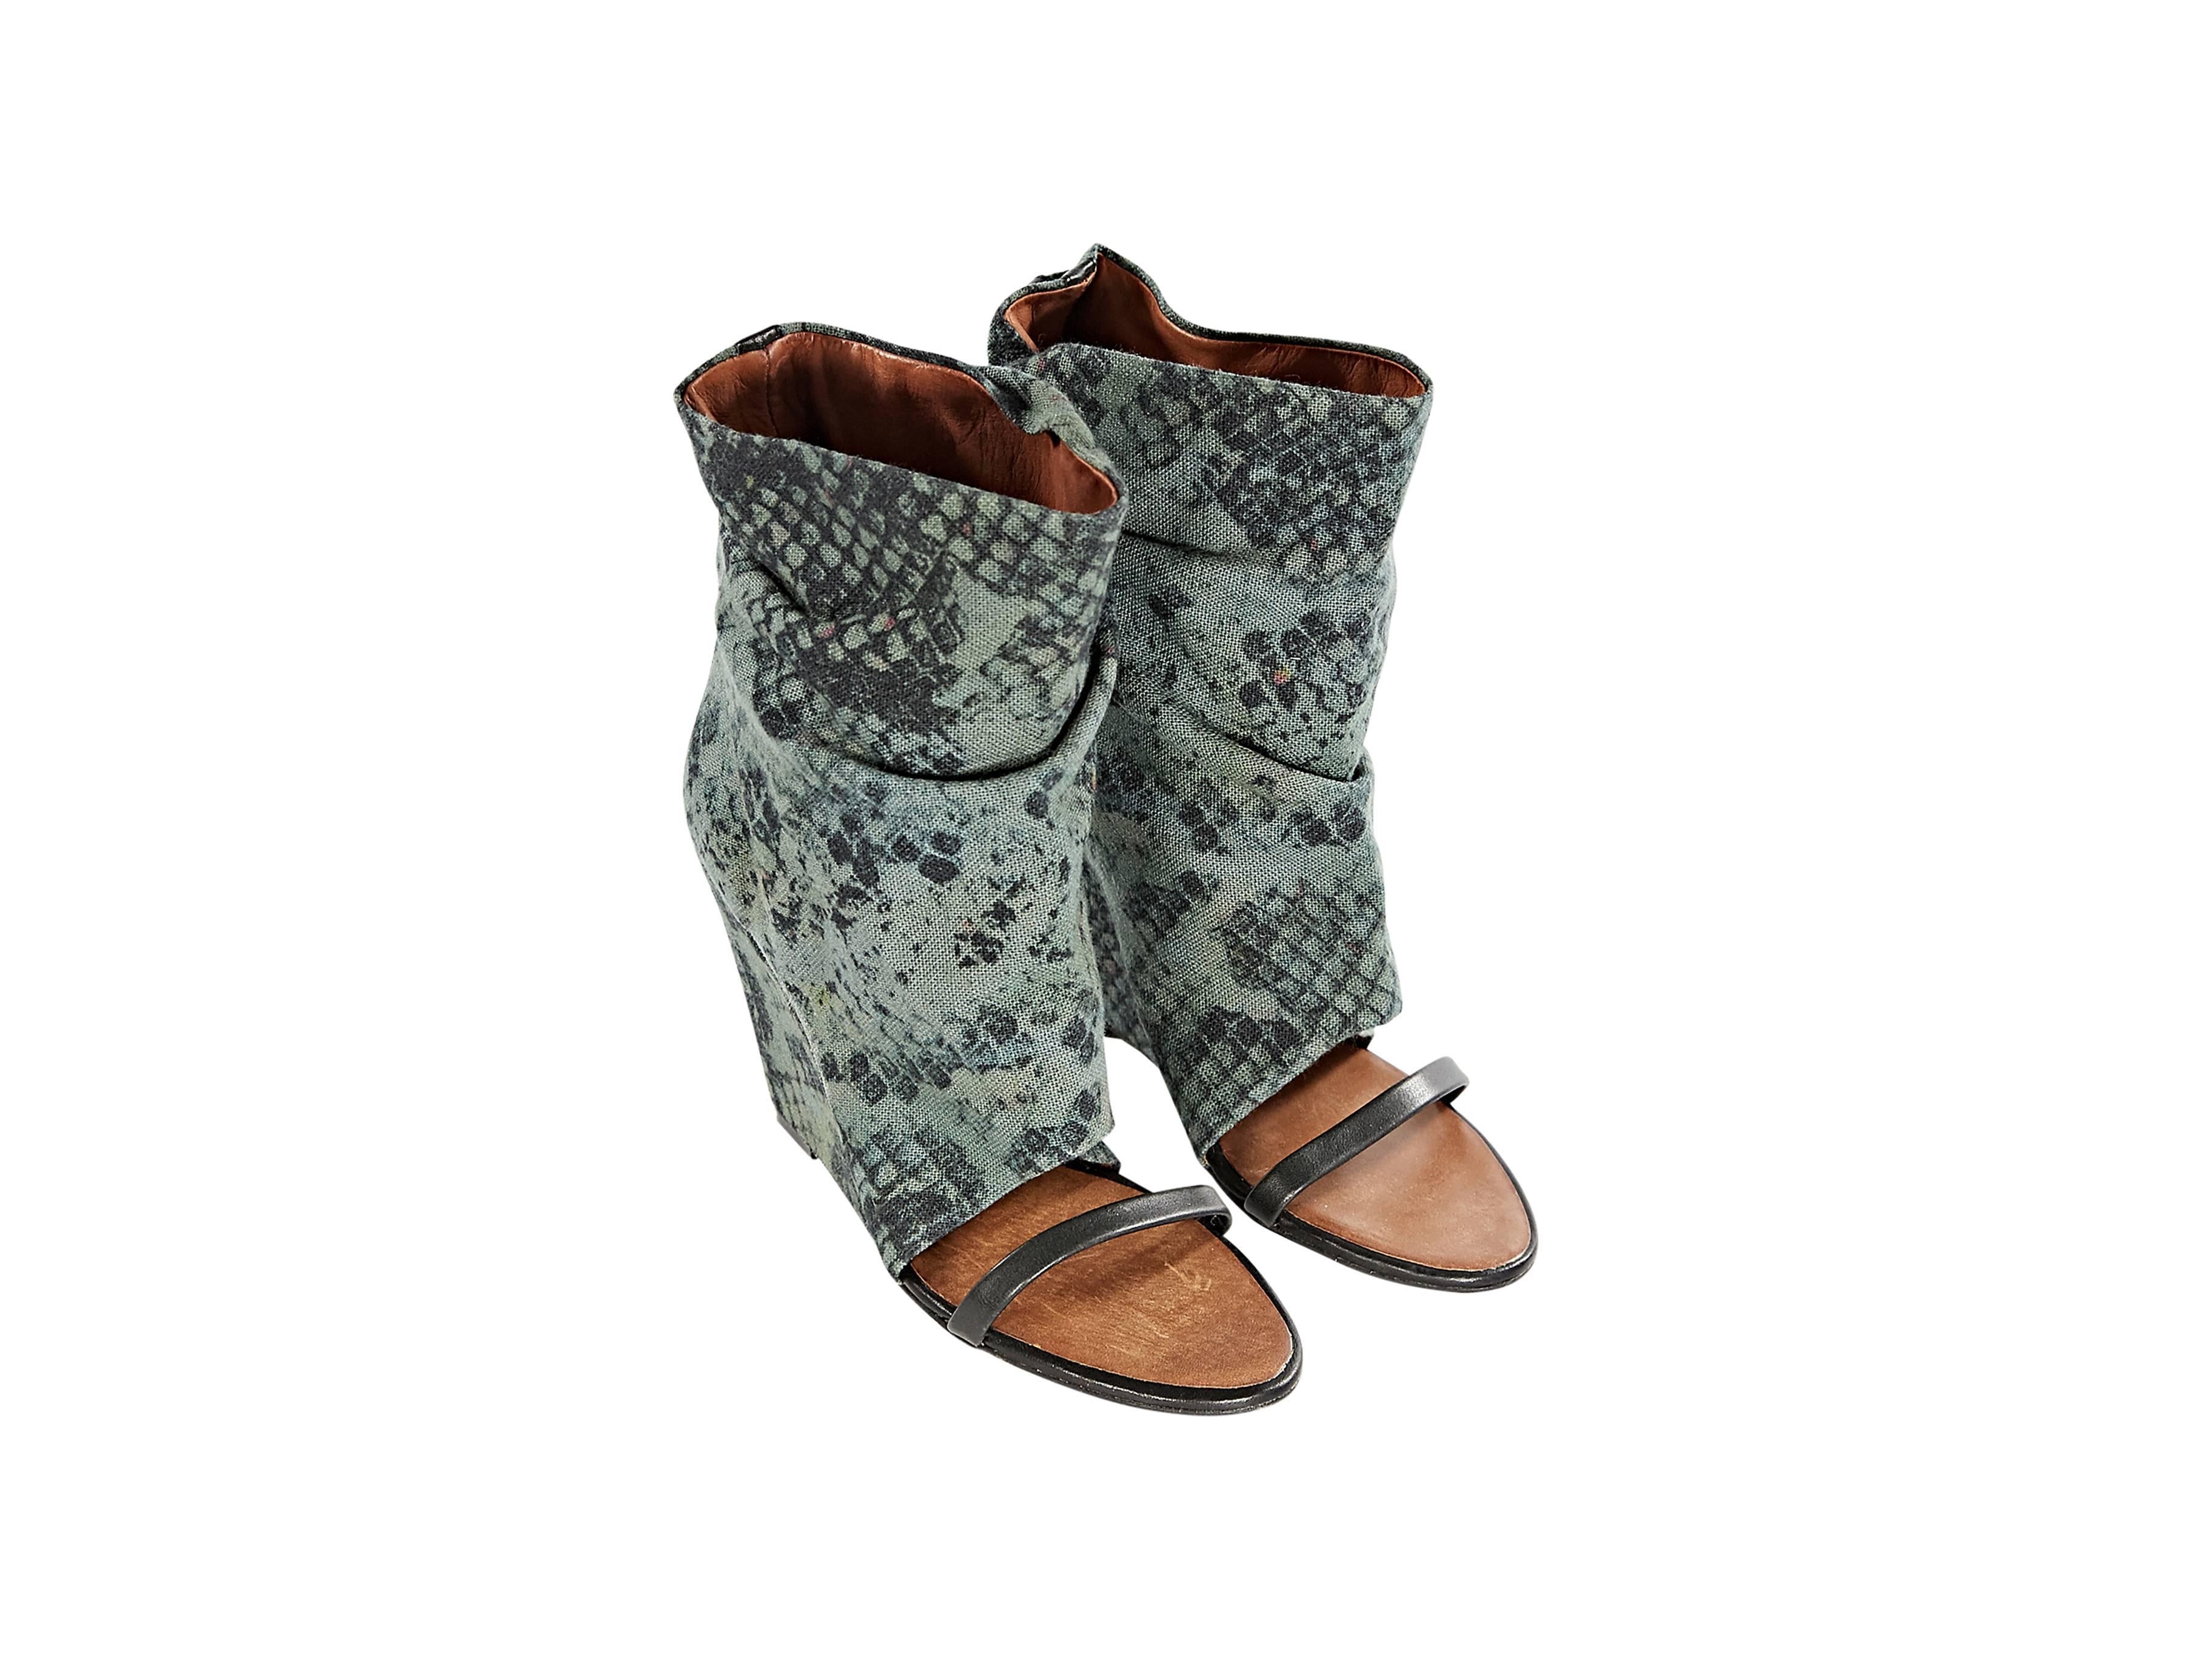 Slouchy canvas ankle boots by Isabel Marant.  Green and black snake-print design. Open toe.  Slip-on style. 